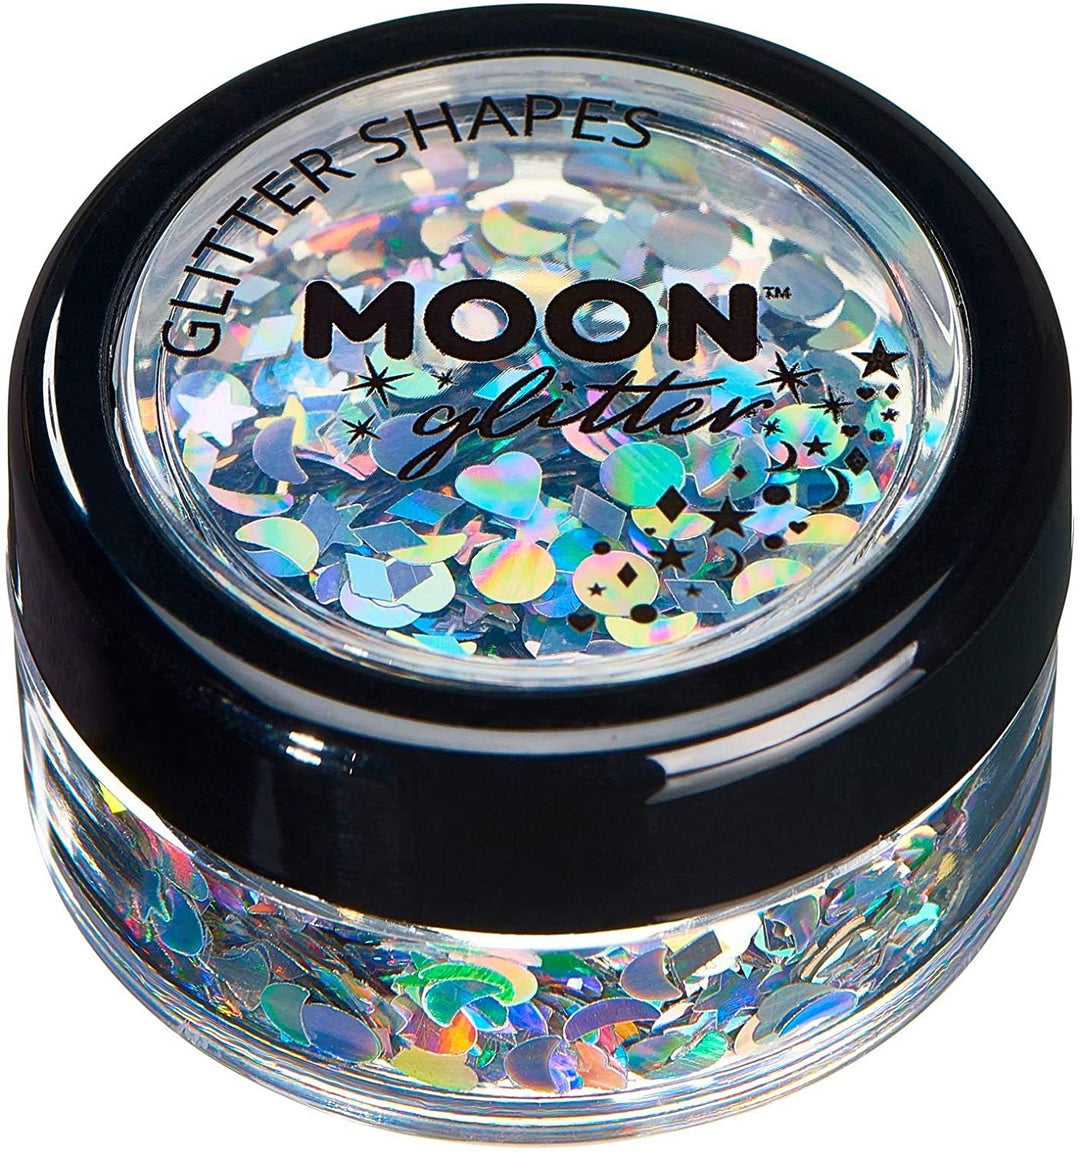 Smiffys Holographic Glitter Shapes by Moon Glitter - Argent - 3g